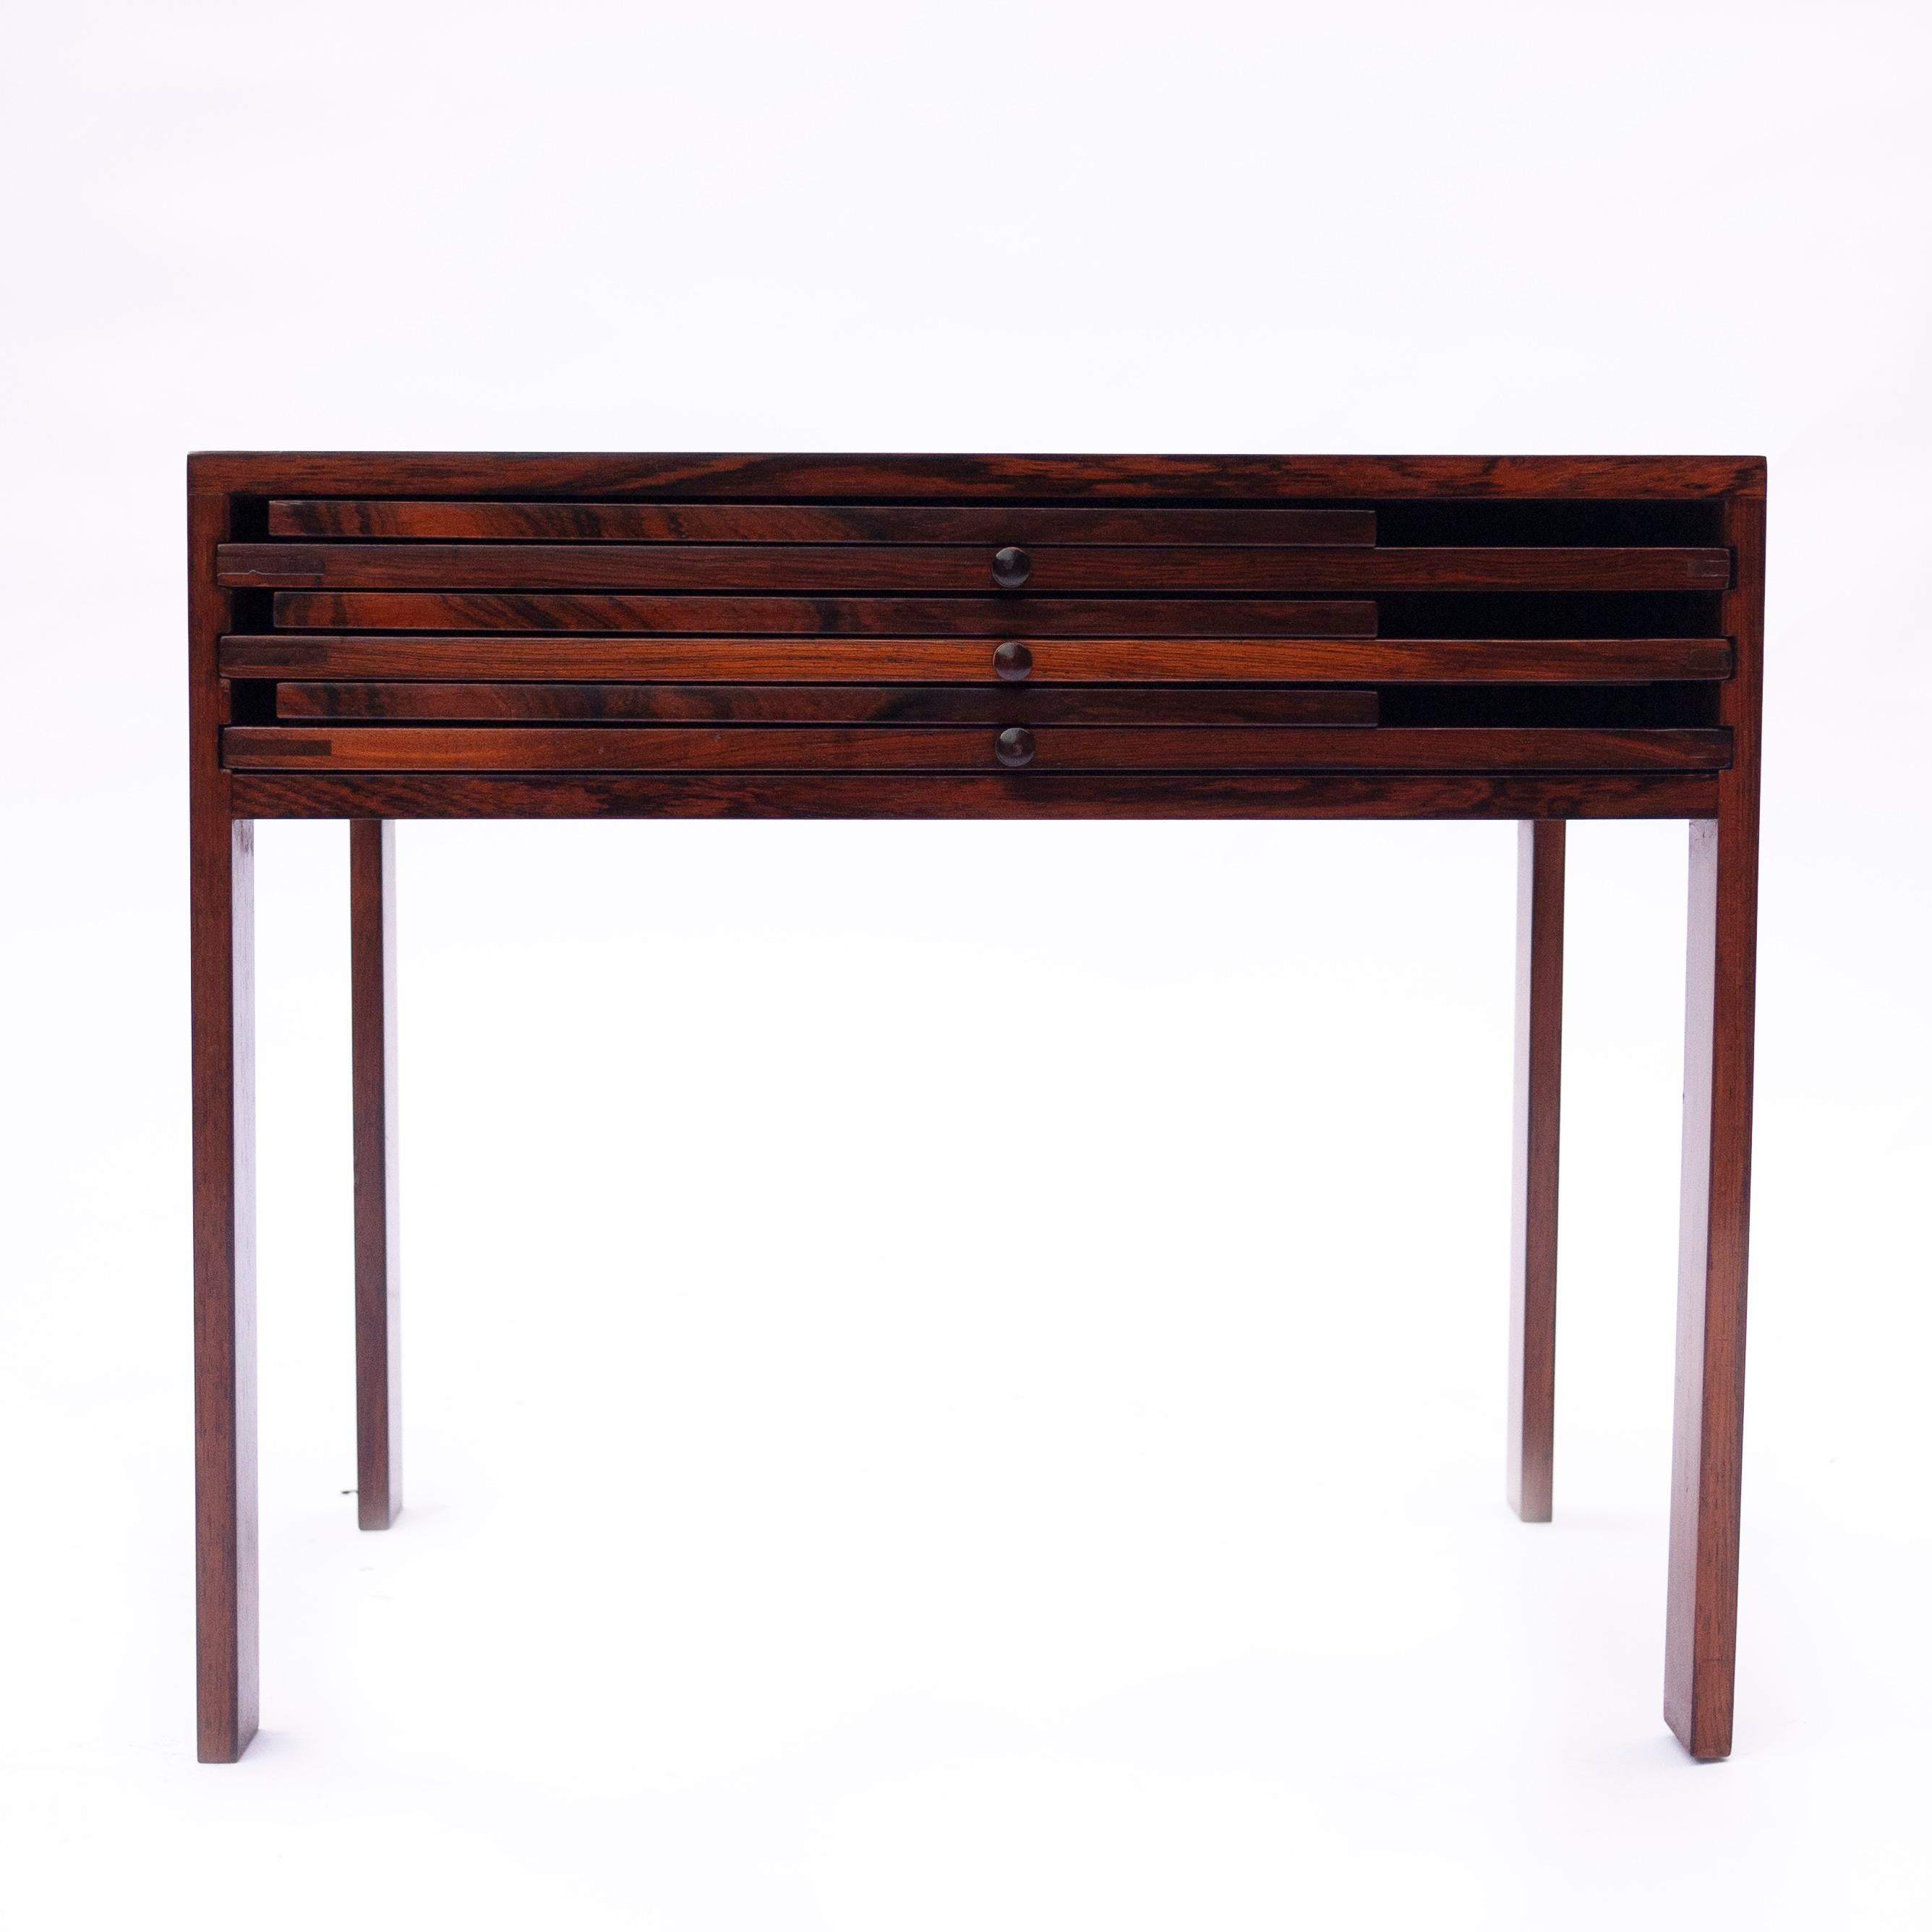 Scandinavian Nesting Tables and Side Table in Rosewood by Illum Wikkelsø, 1960s For Sale 2